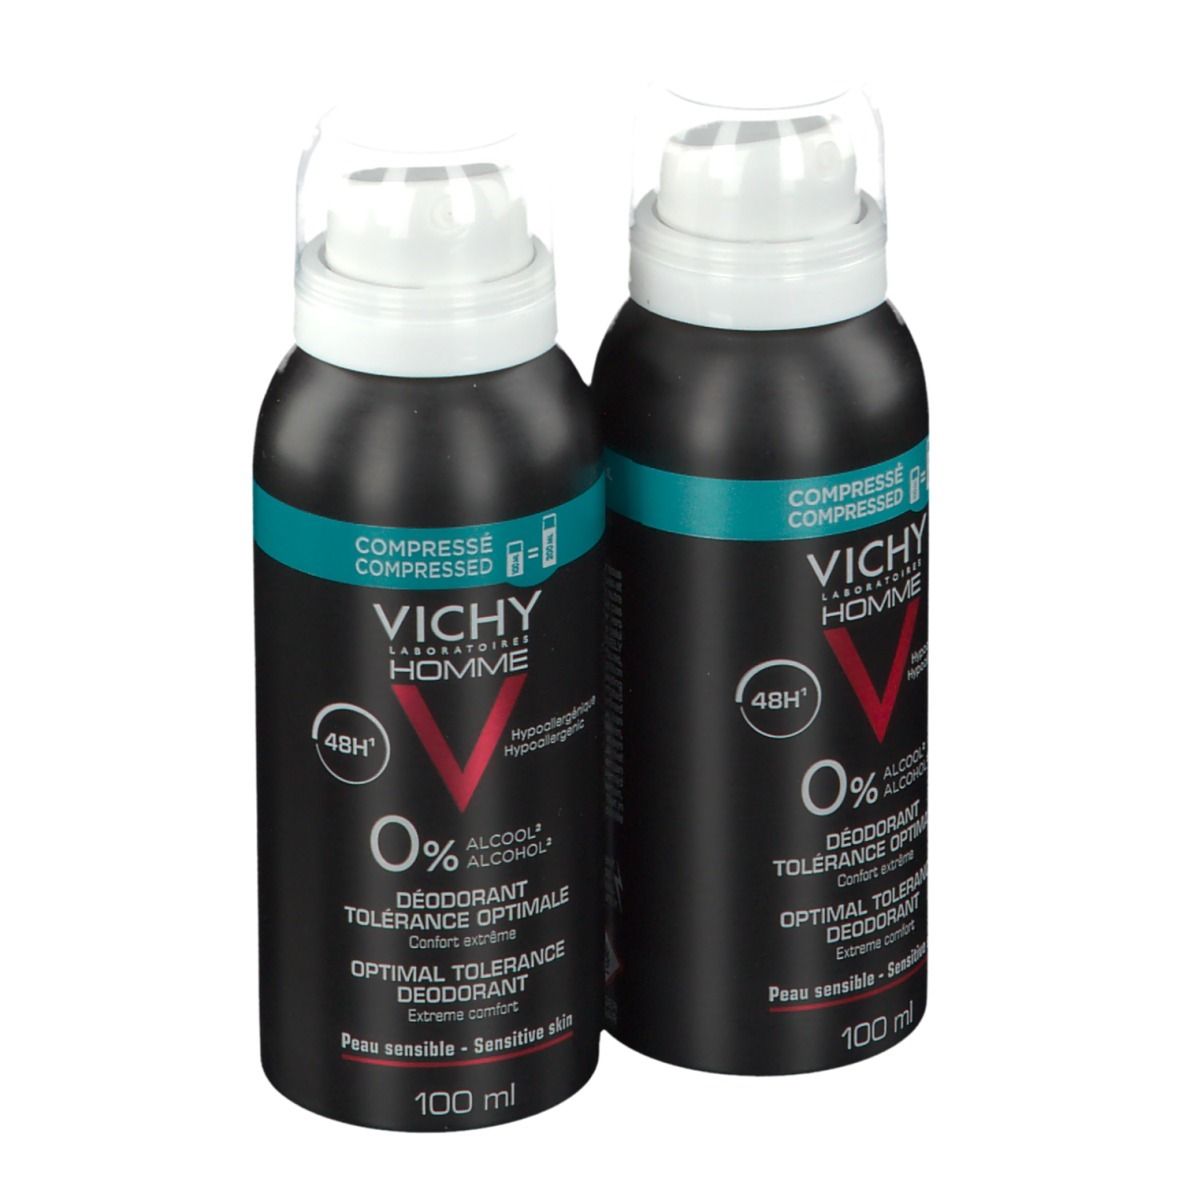 Vichy Homme Déodorant Tolérance Optimale 48h DUO